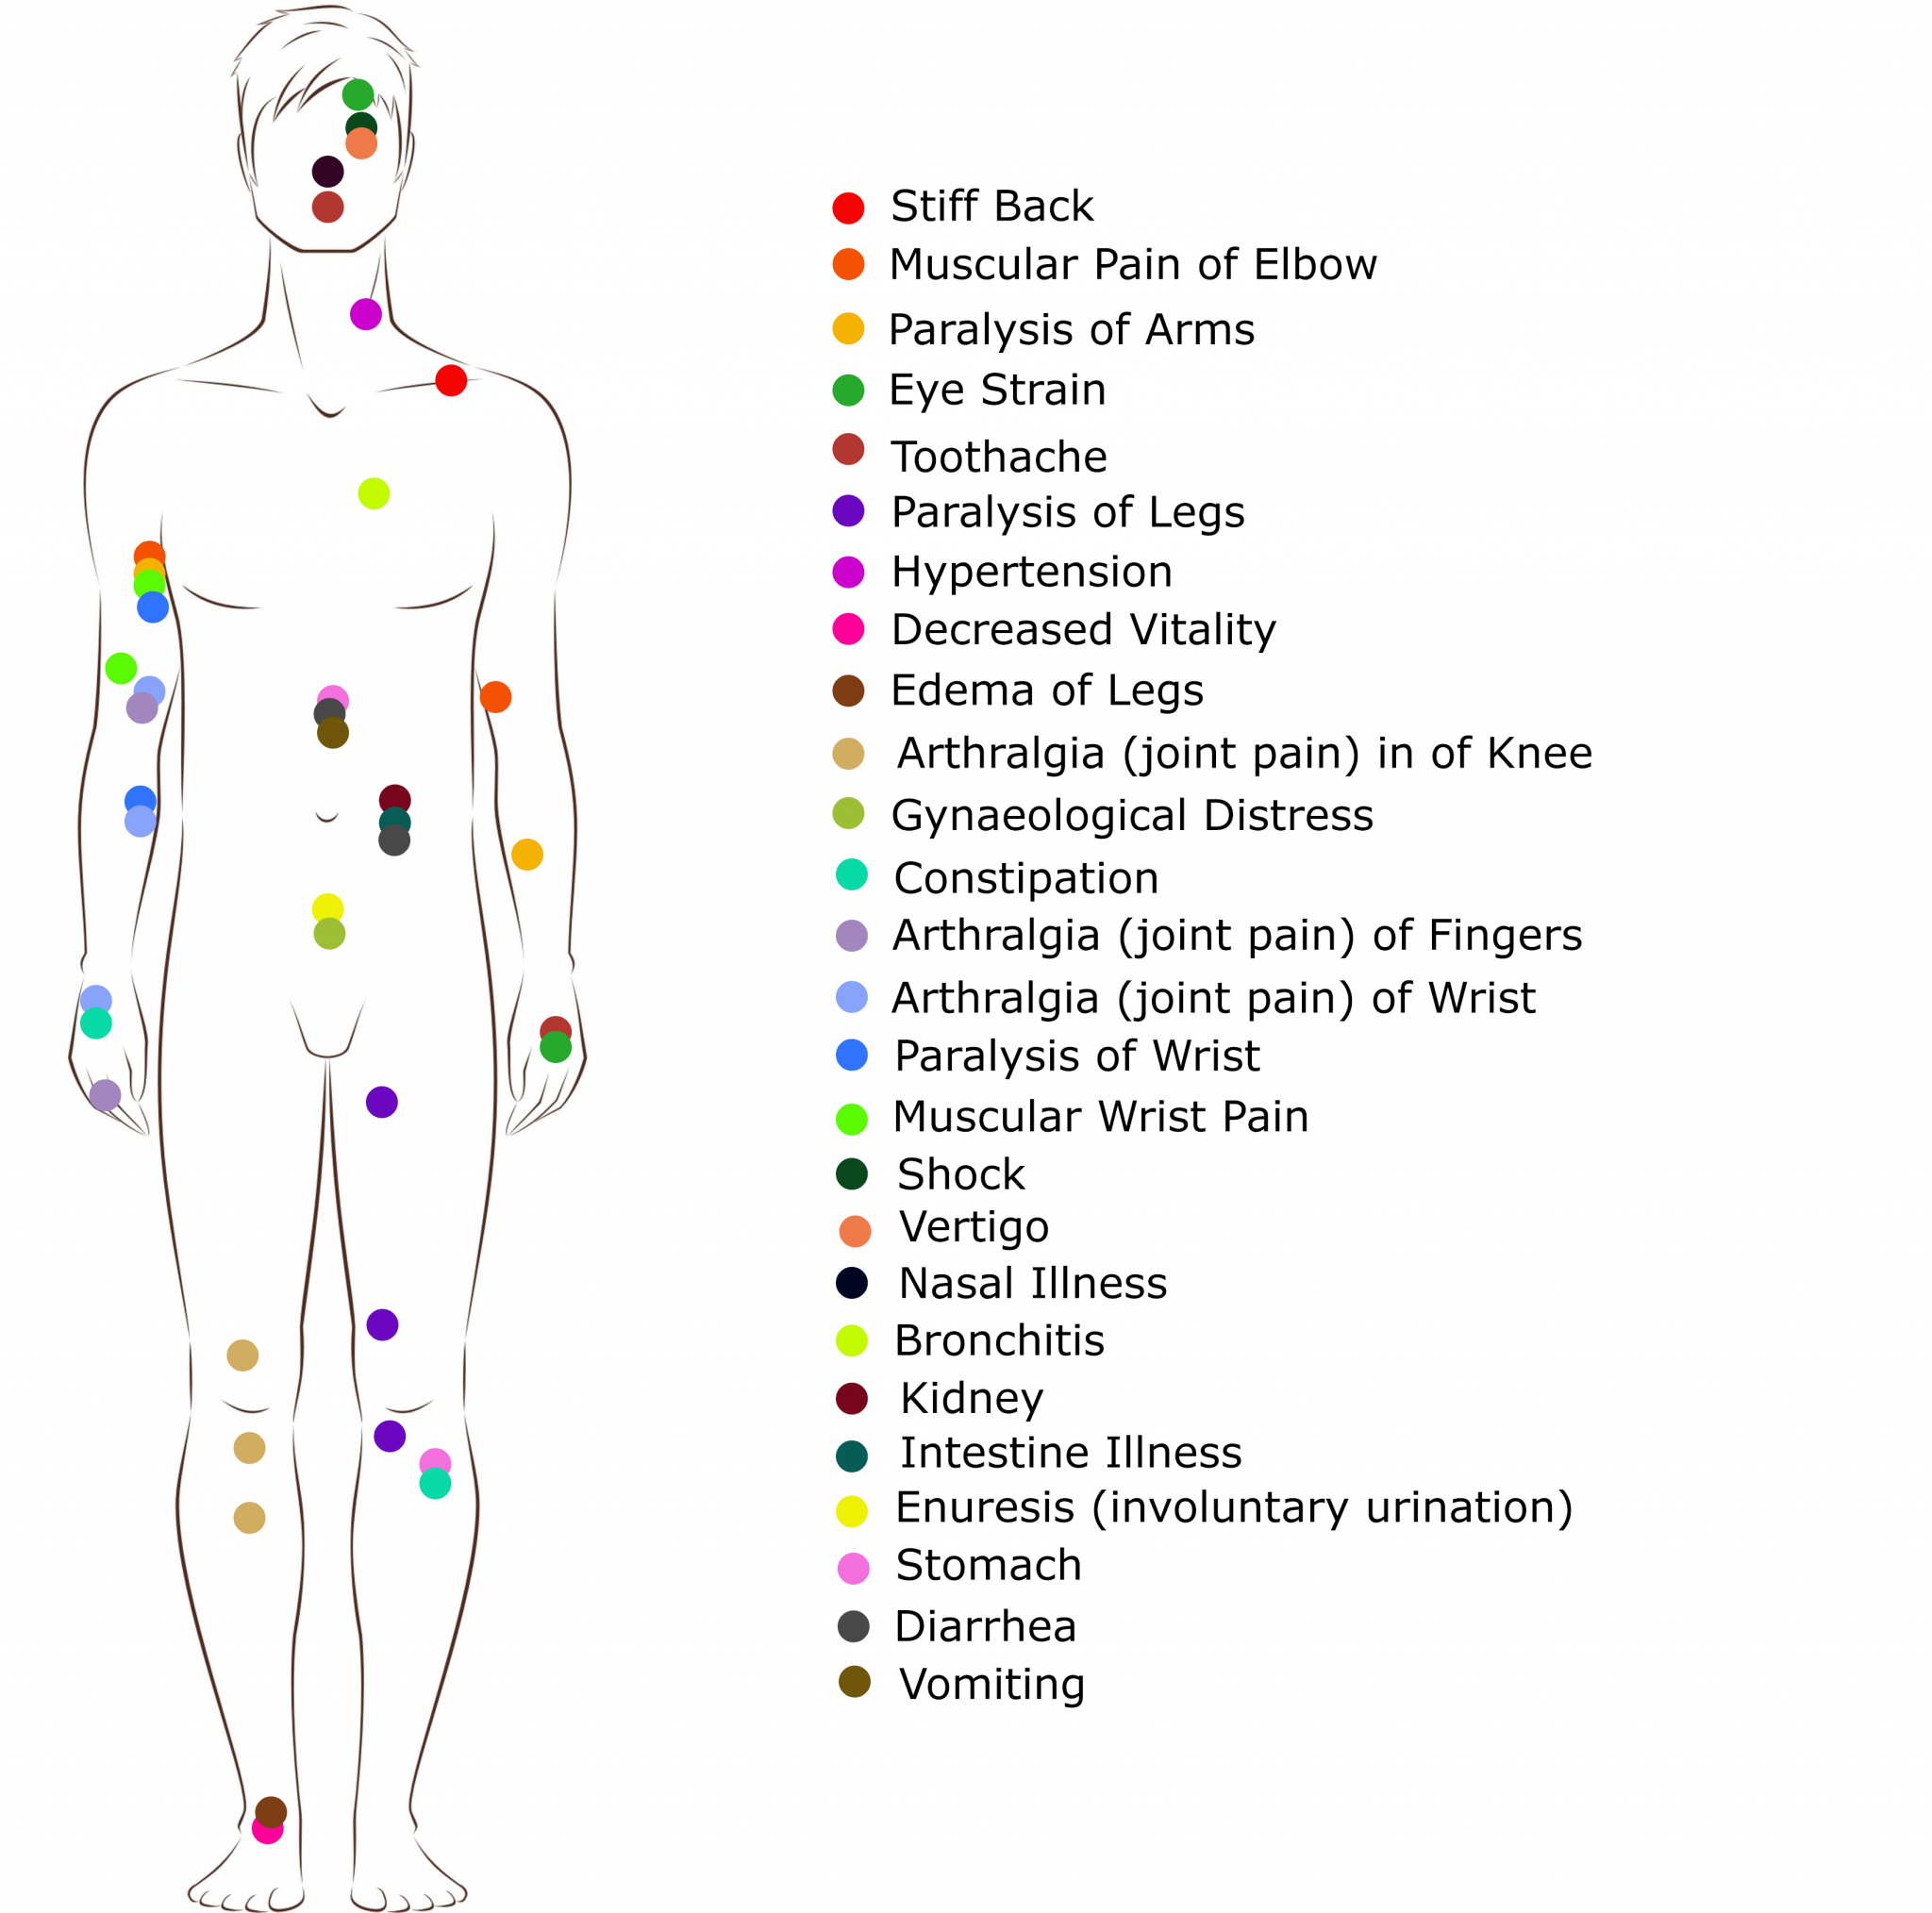 Foot reflexology chart to map sole zones and organs